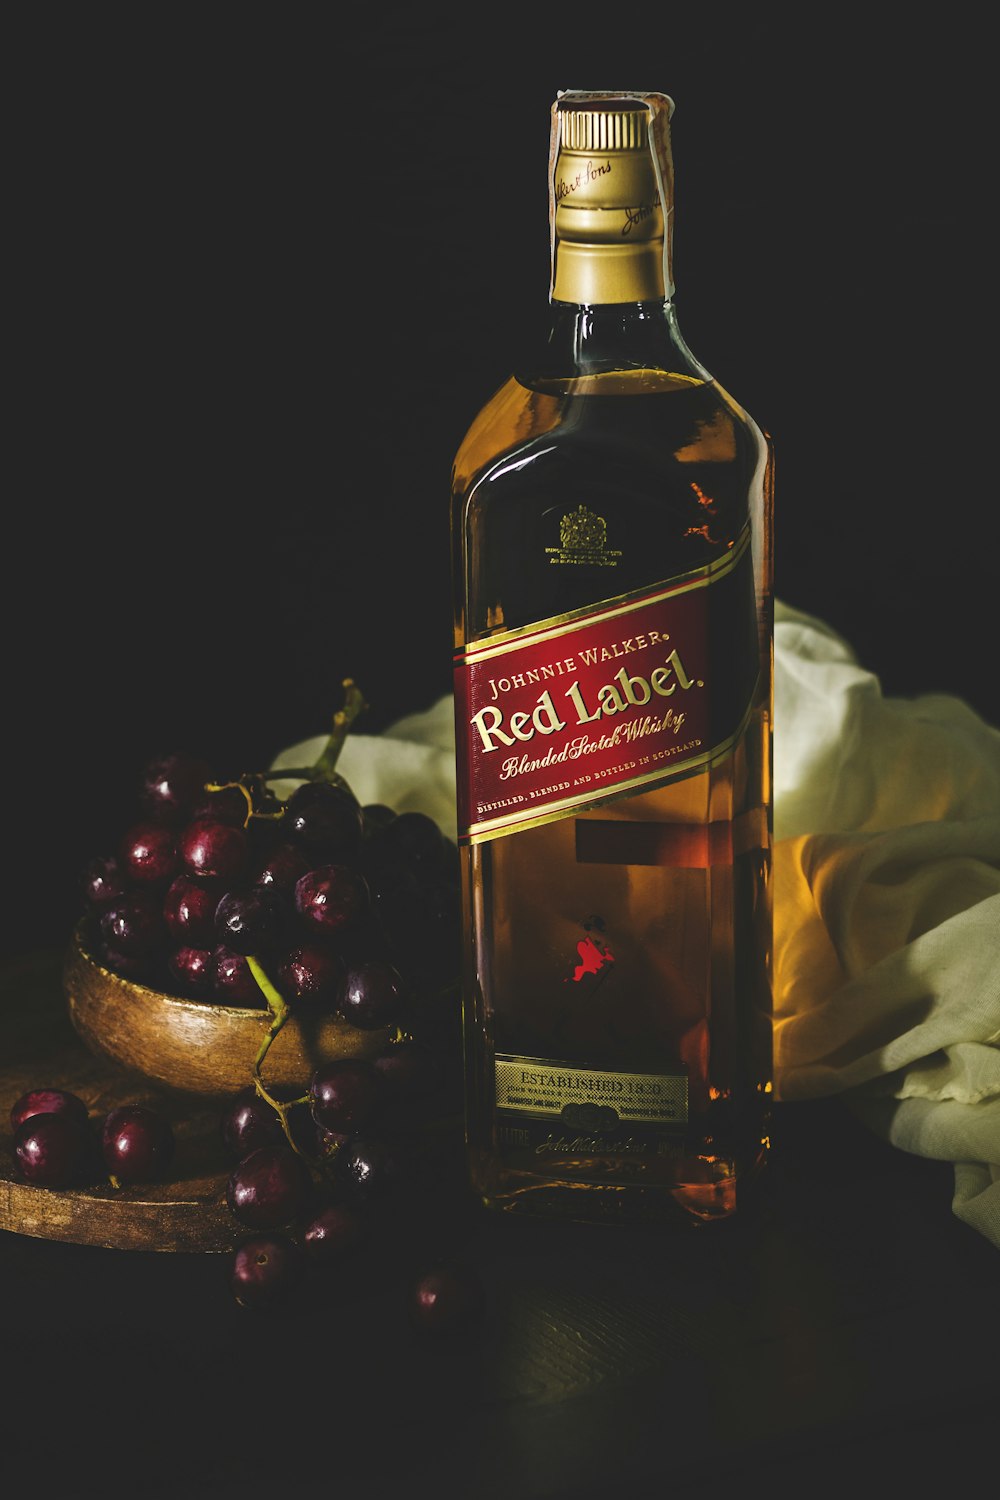 Johnnie Walker Pictures | Download Free Images & Stock Photos on Unsplash